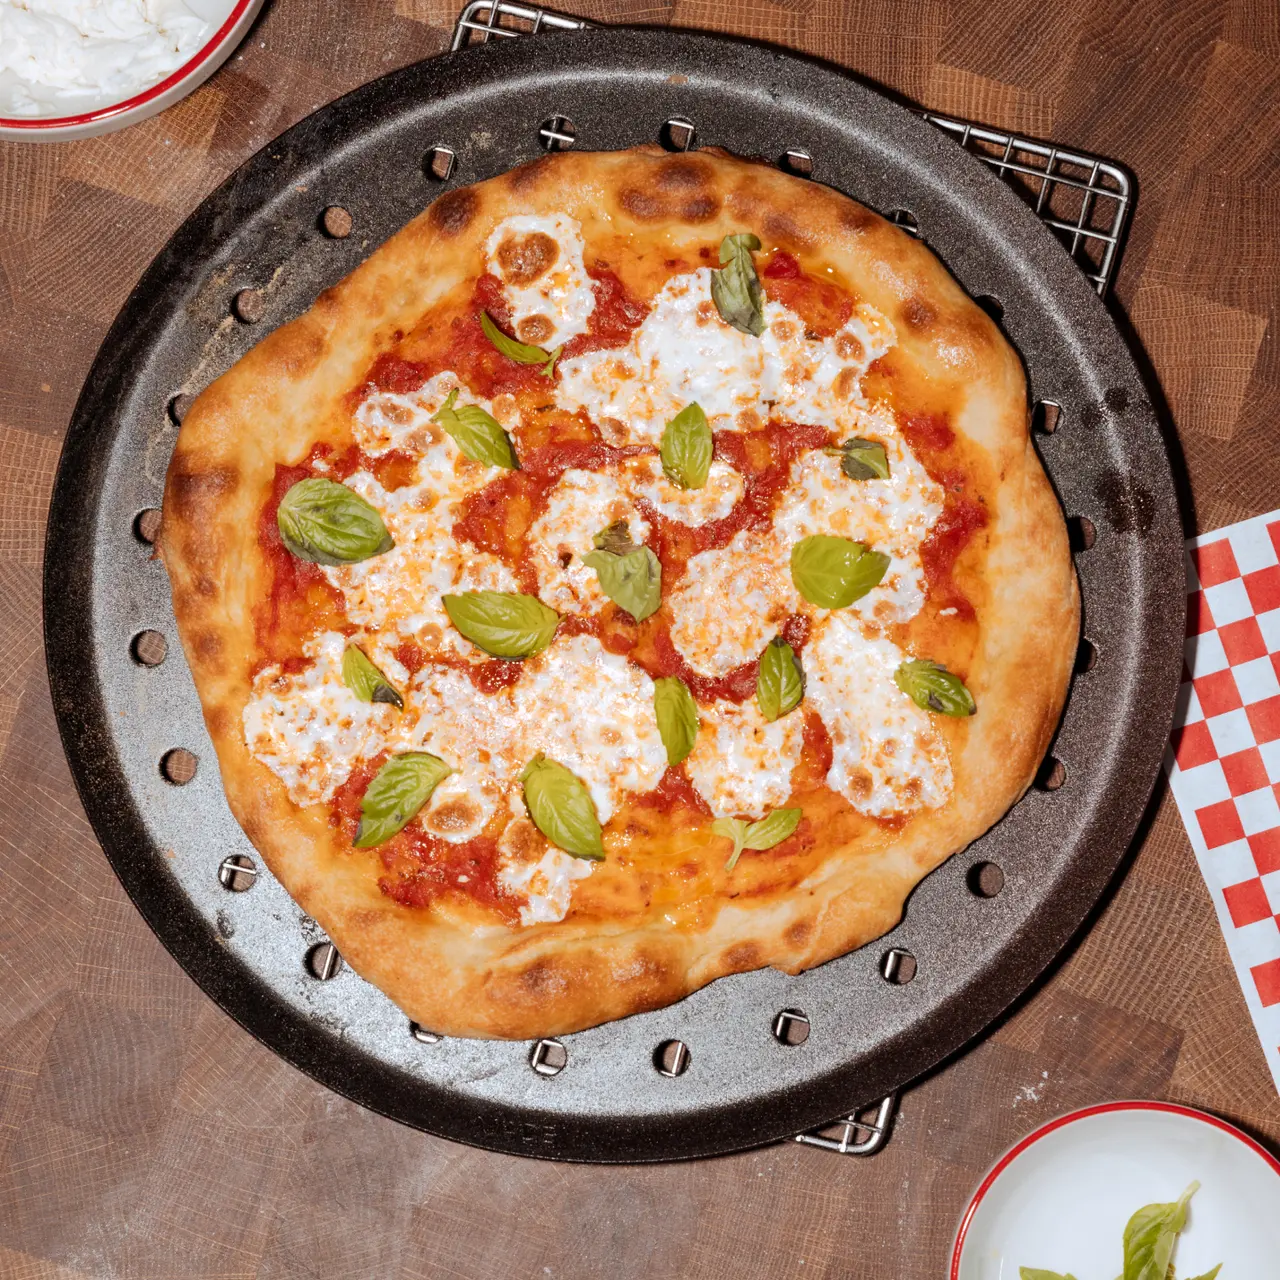 A freshly baked pizza with melted cheese and basil leaves is presented on a round black baking tray on a wooden surface.